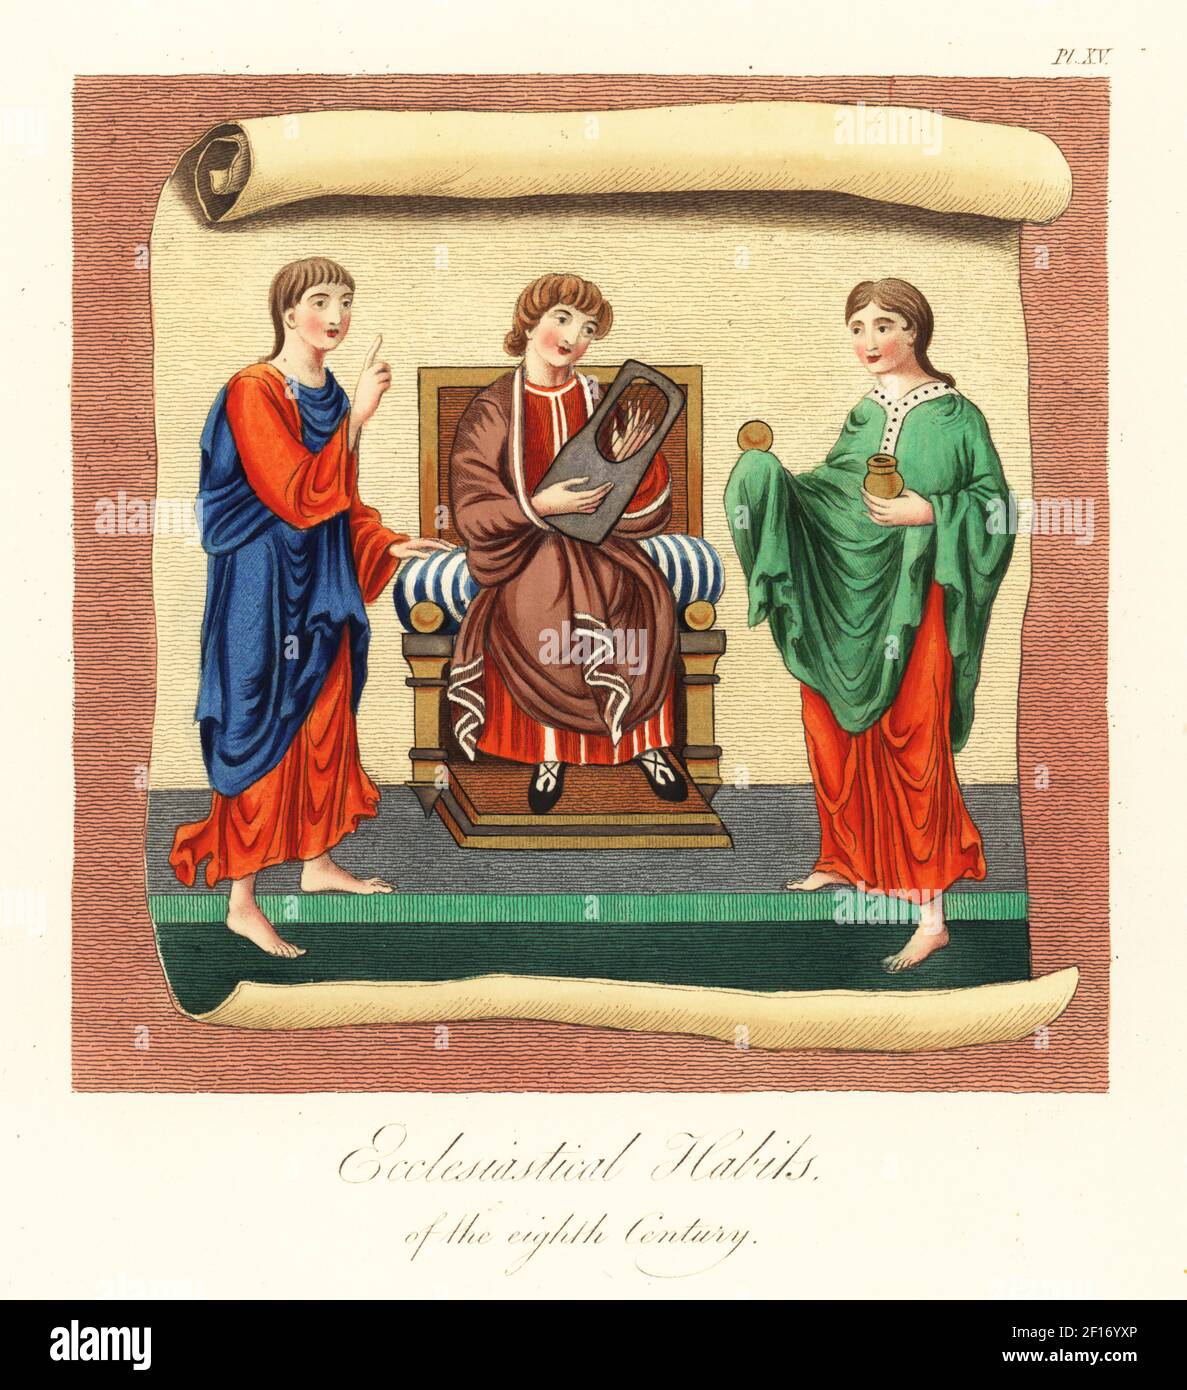 Anglo-Saxon ecclesiastical habits, 8th century. Priest from Old English Hexateuch, Cotton MS Claudius B iv, King David playing on a harp from Cotton MS Vespasian Psalter A i, and priest holding the host and the ciborium from Cotton MS Cleopatra C viii. Handcoloured engraving by Joseph Strutt from his Complete View of the Dress and Habits of the People of England, Henry Bohn, London, 1842. Stock Photo